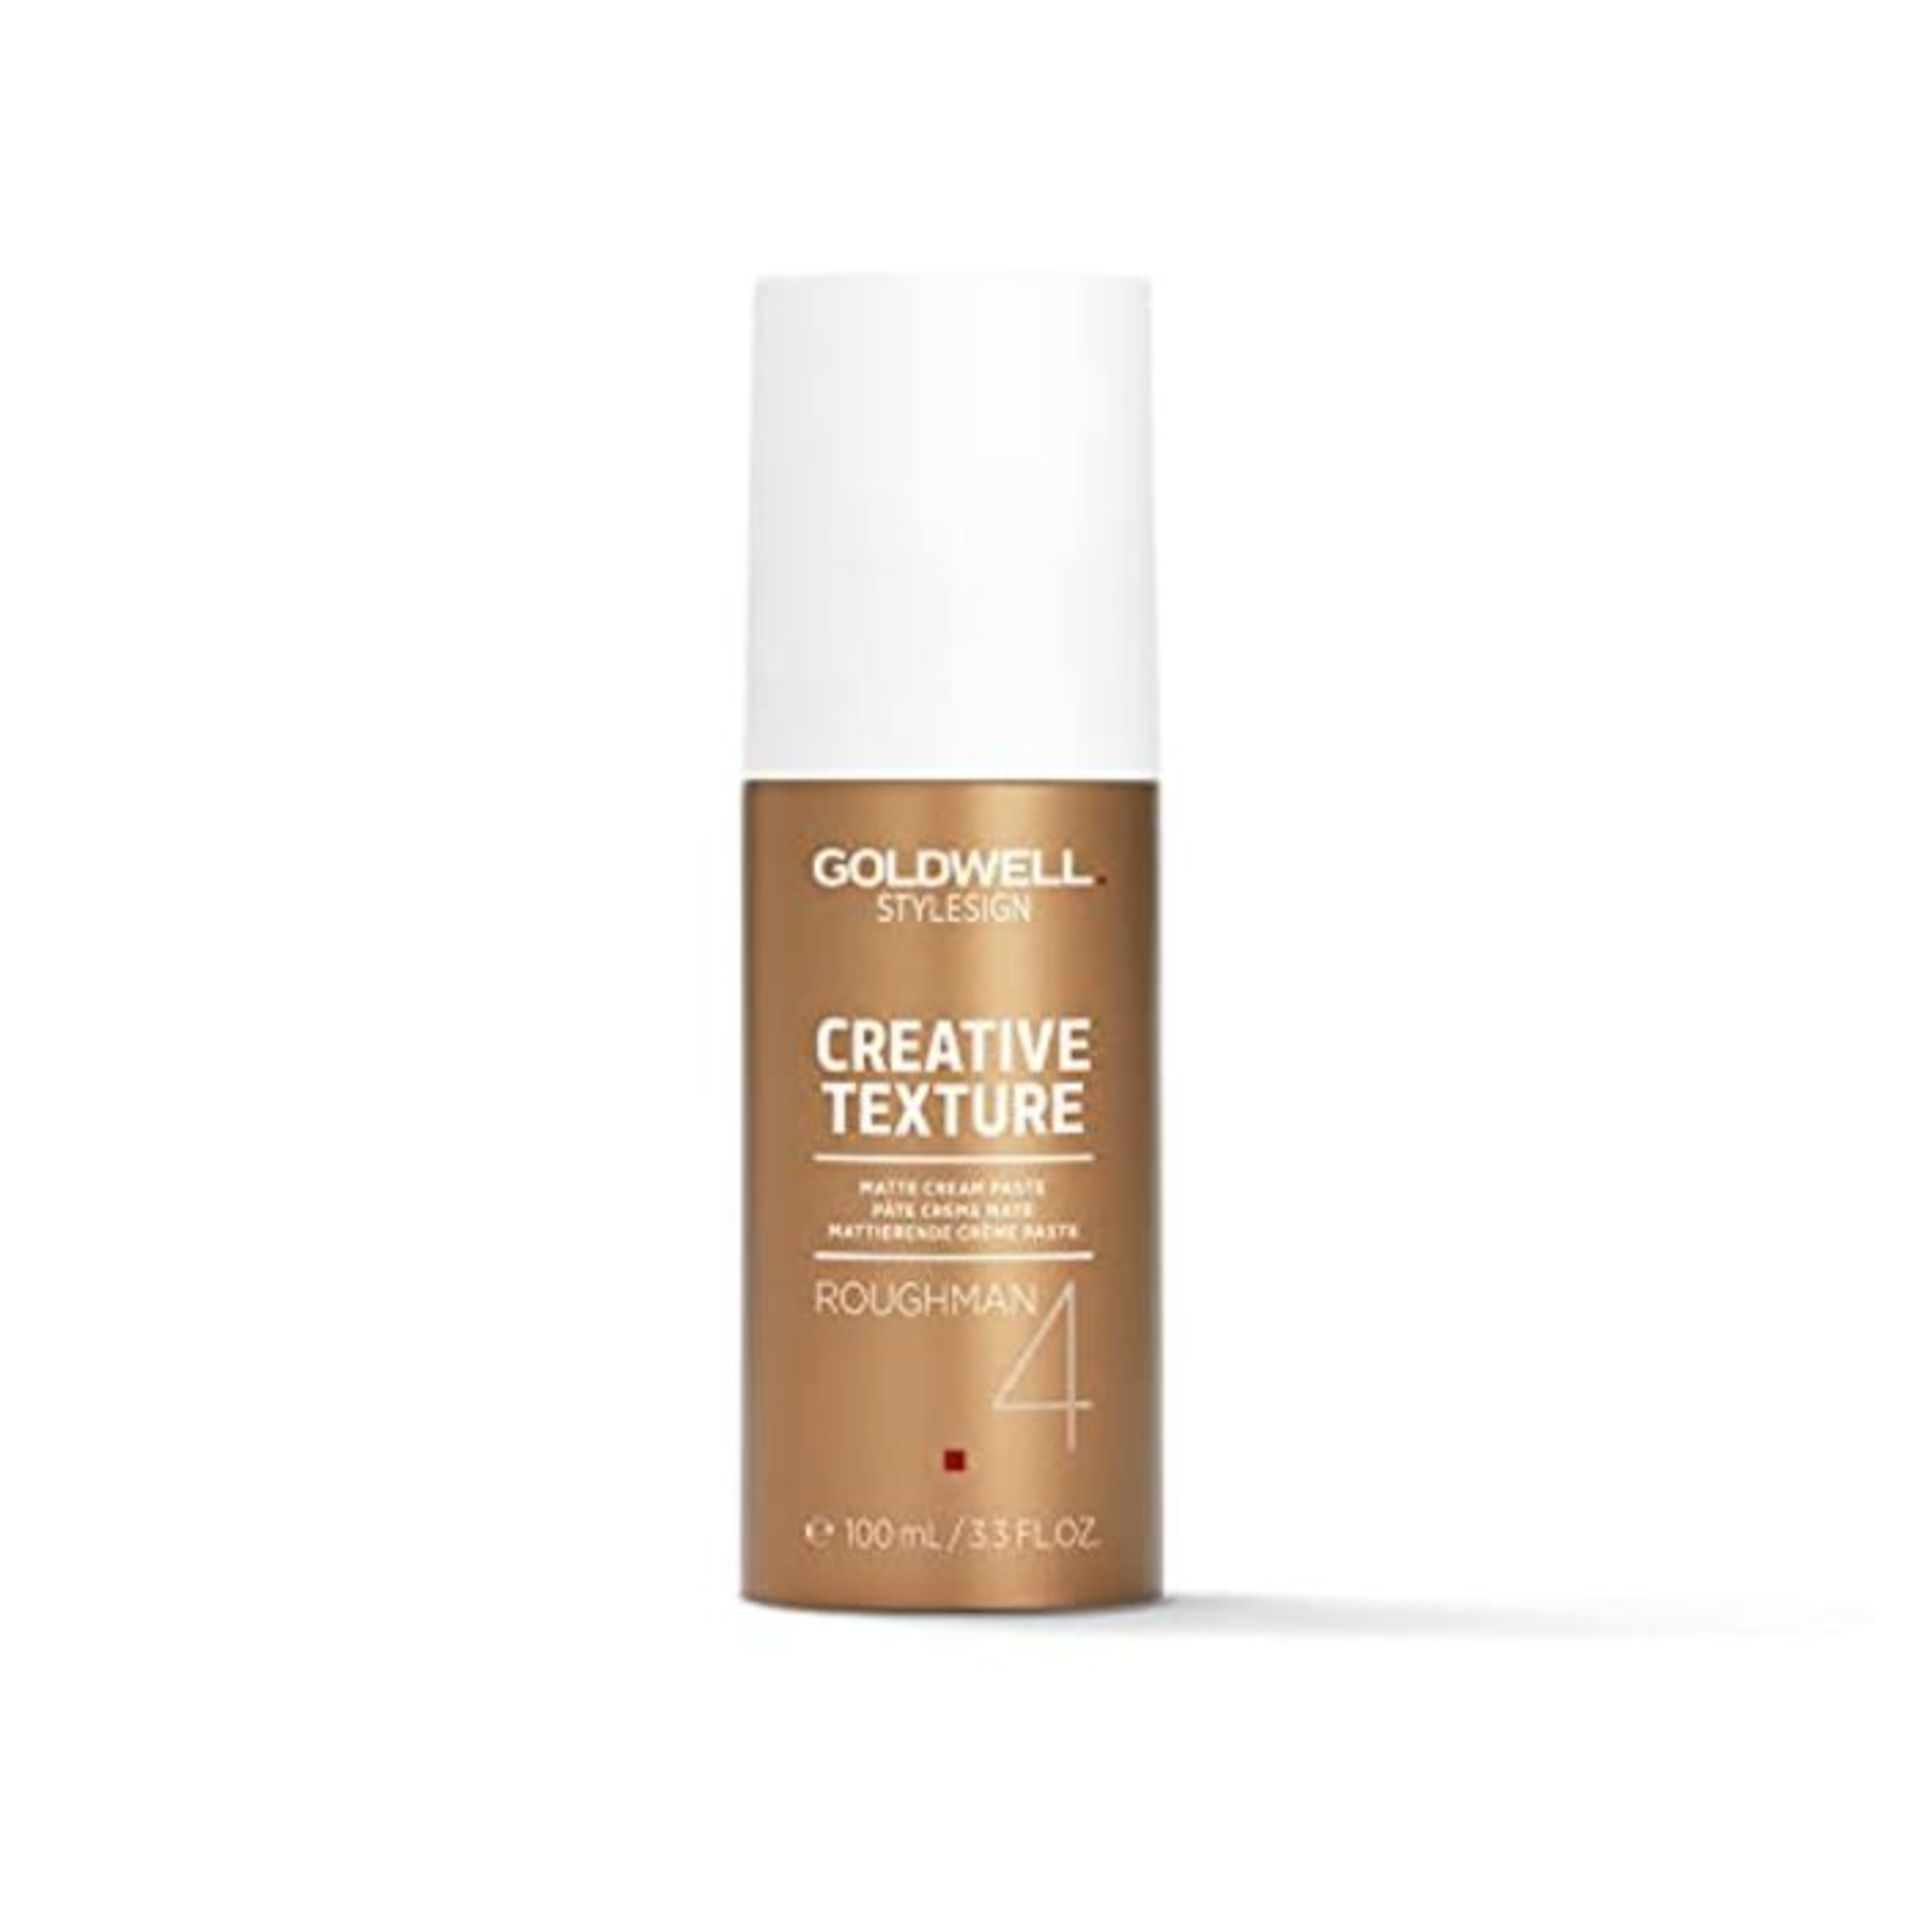 Goldwell StyleSign Creative Texture, Roughman Matte Cream Paste for Normal to Course H